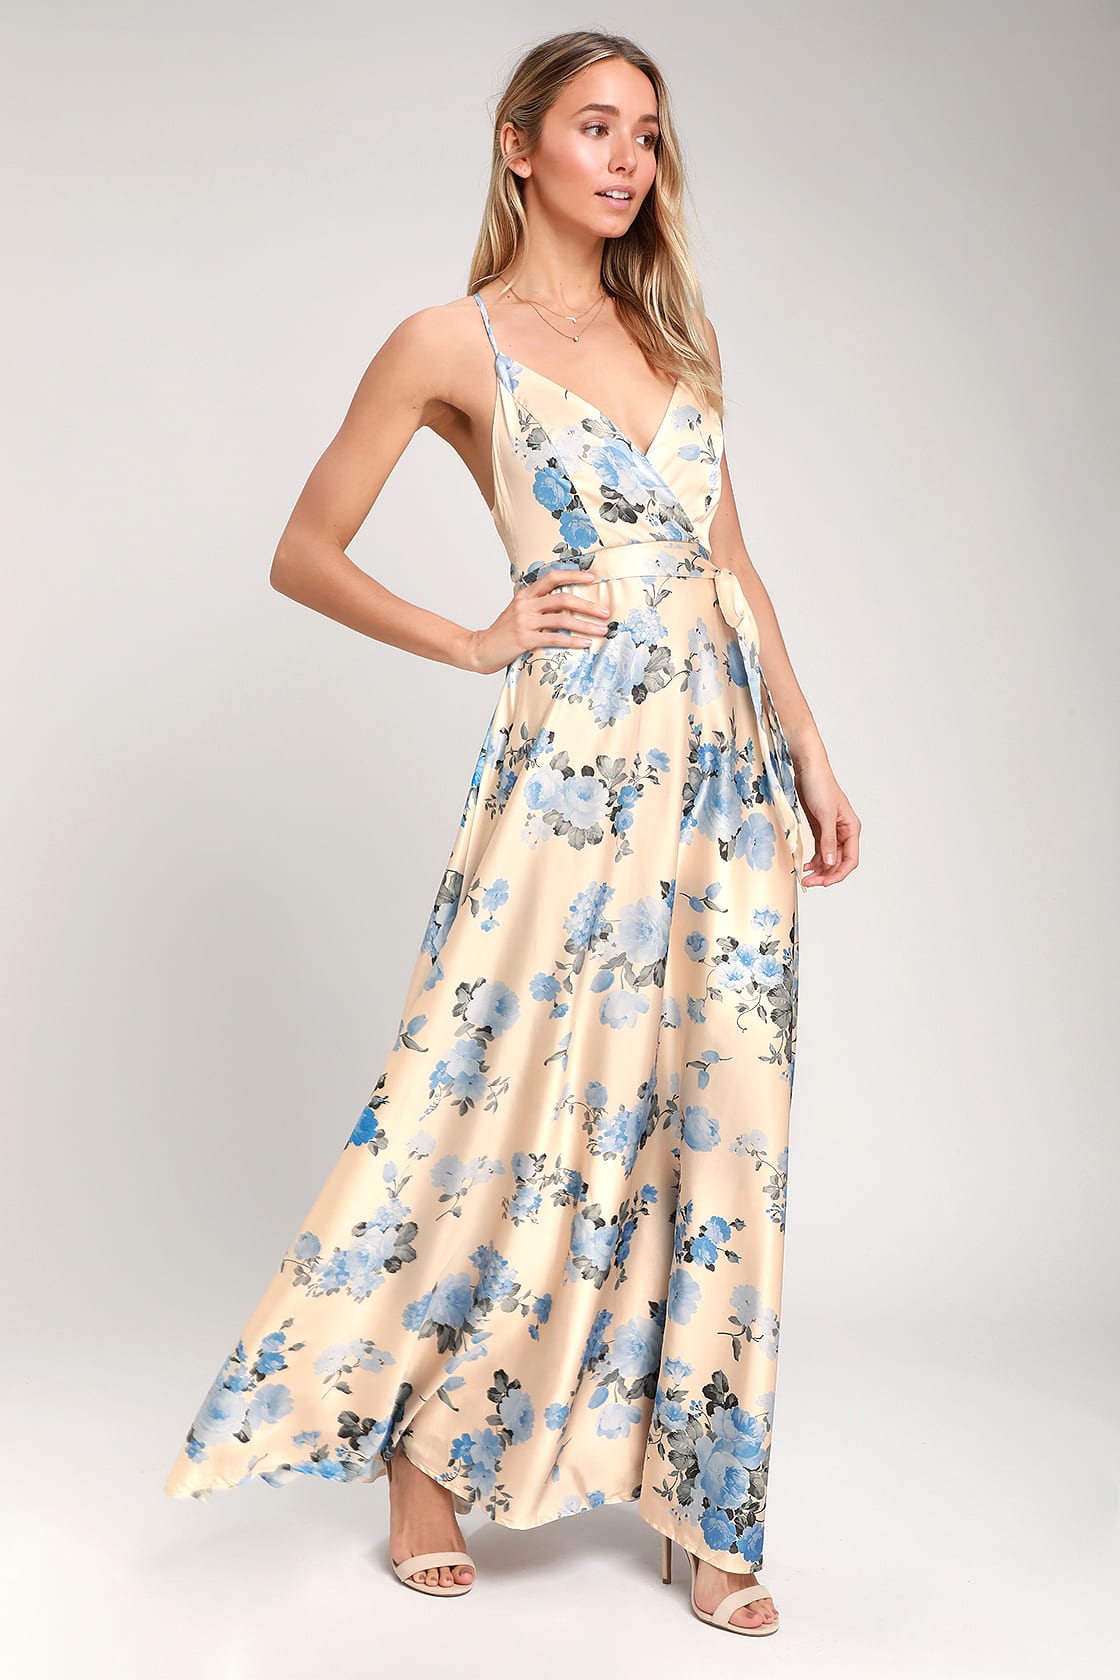 Champagne Satin Floral Print Maxi Dress for Beach Wedding and Wedding in Greece